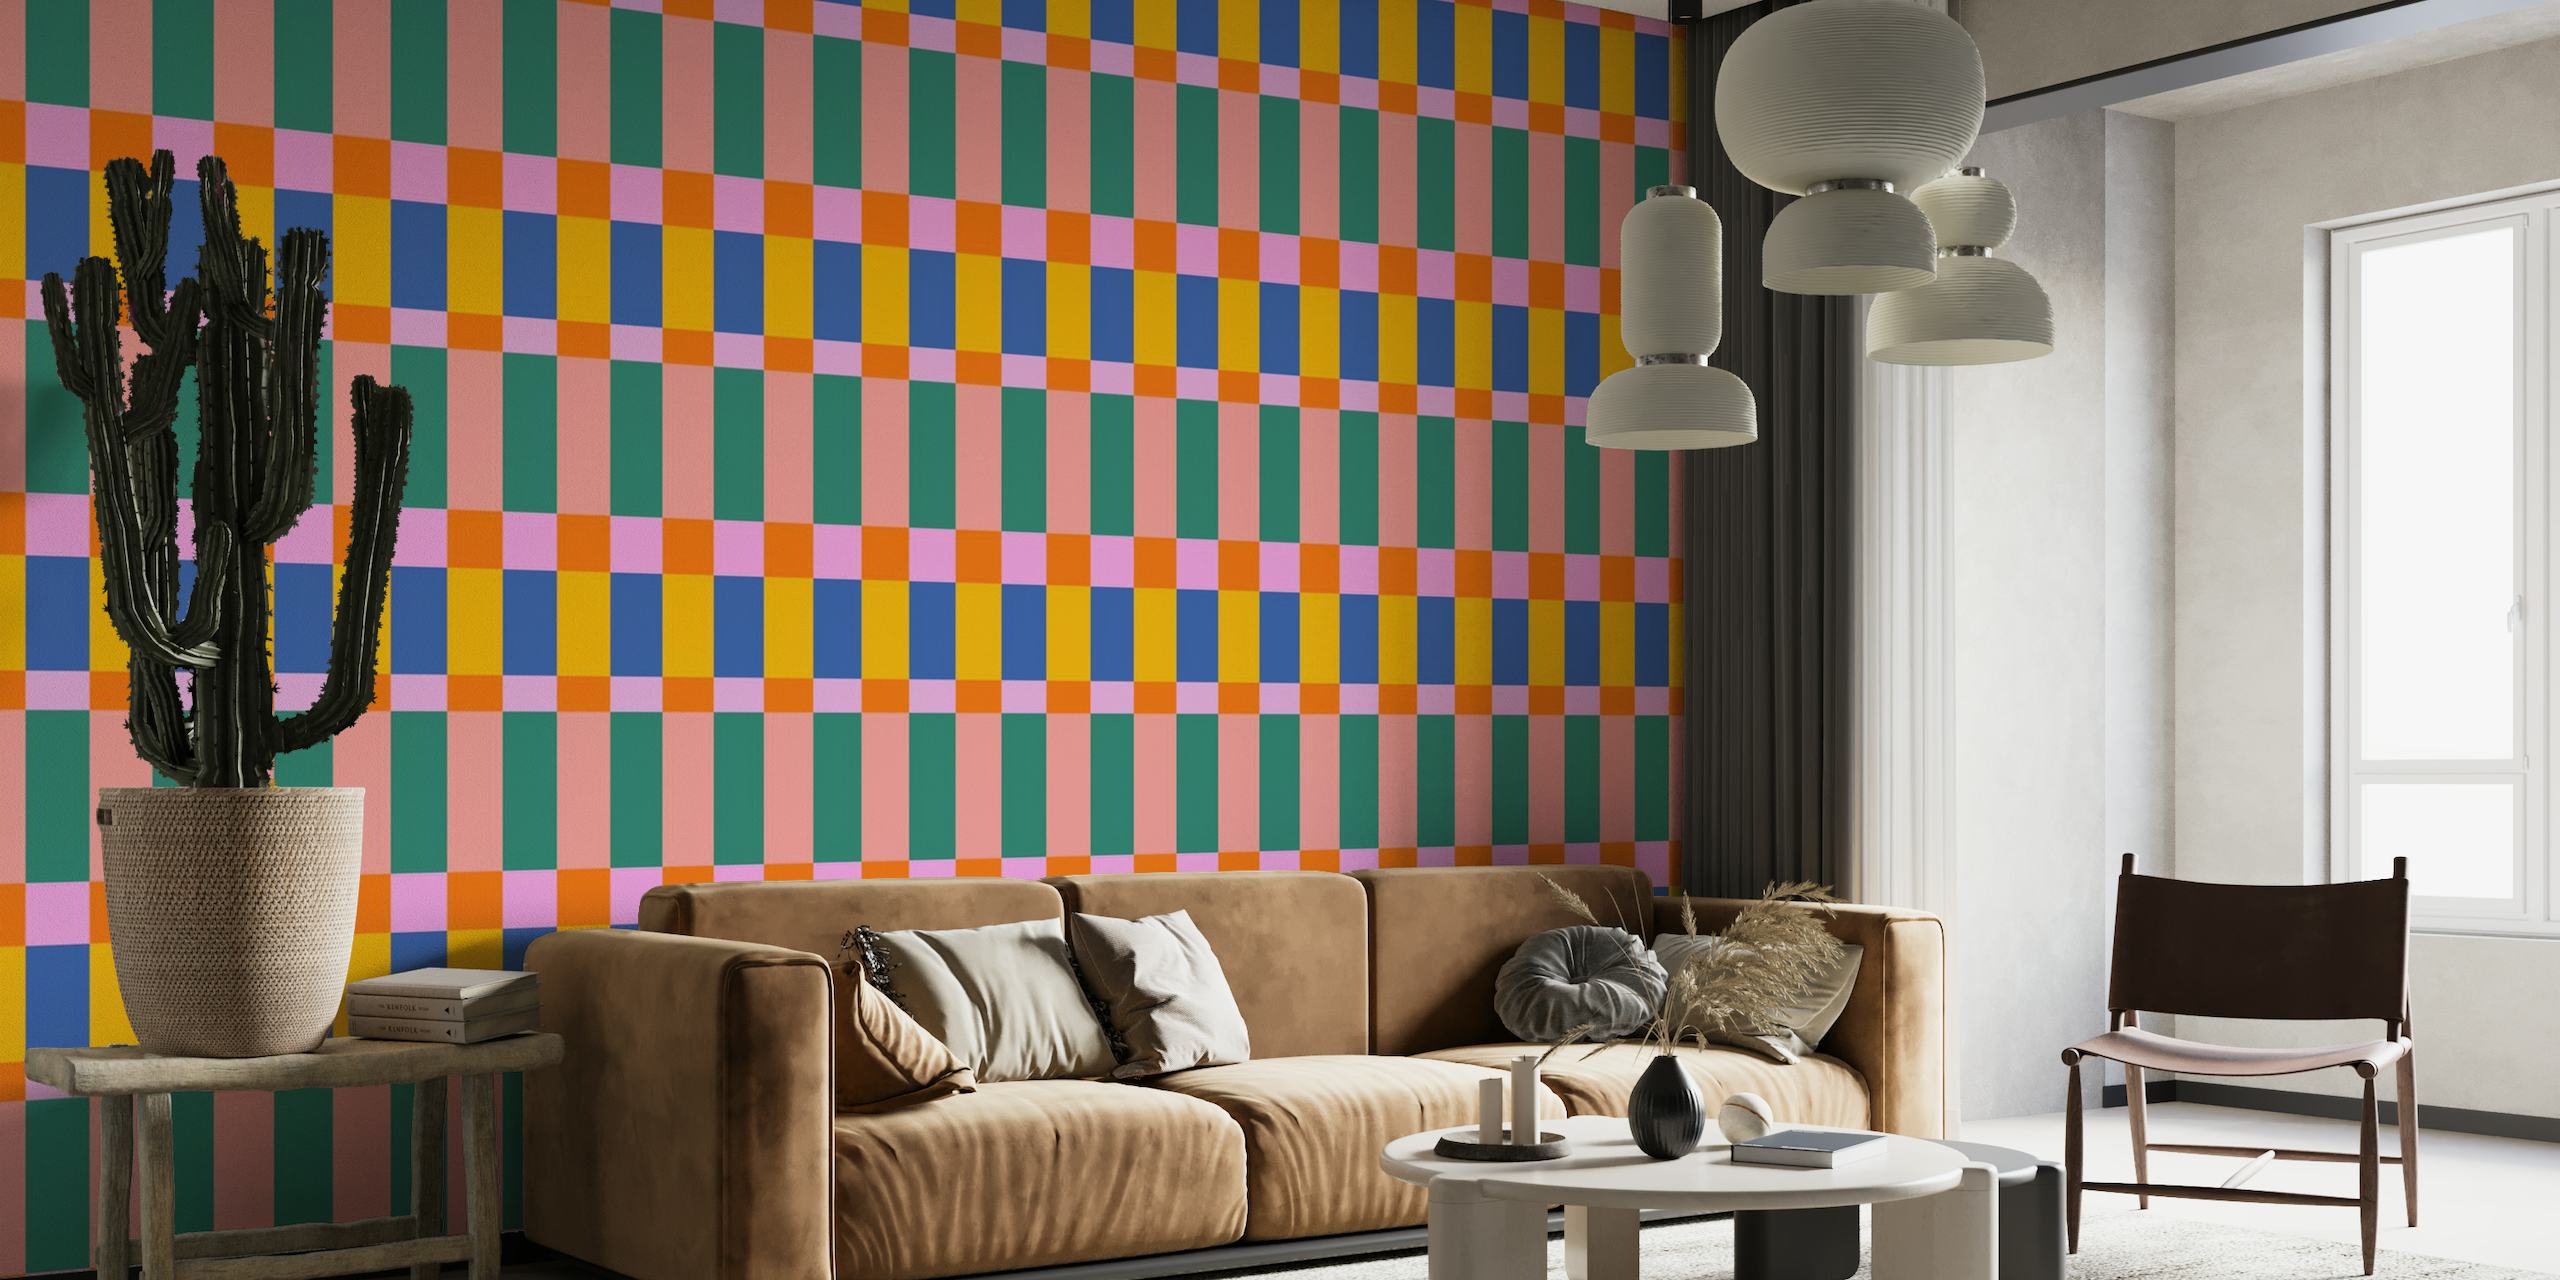 Colorful Checked Geometric Shapes behang